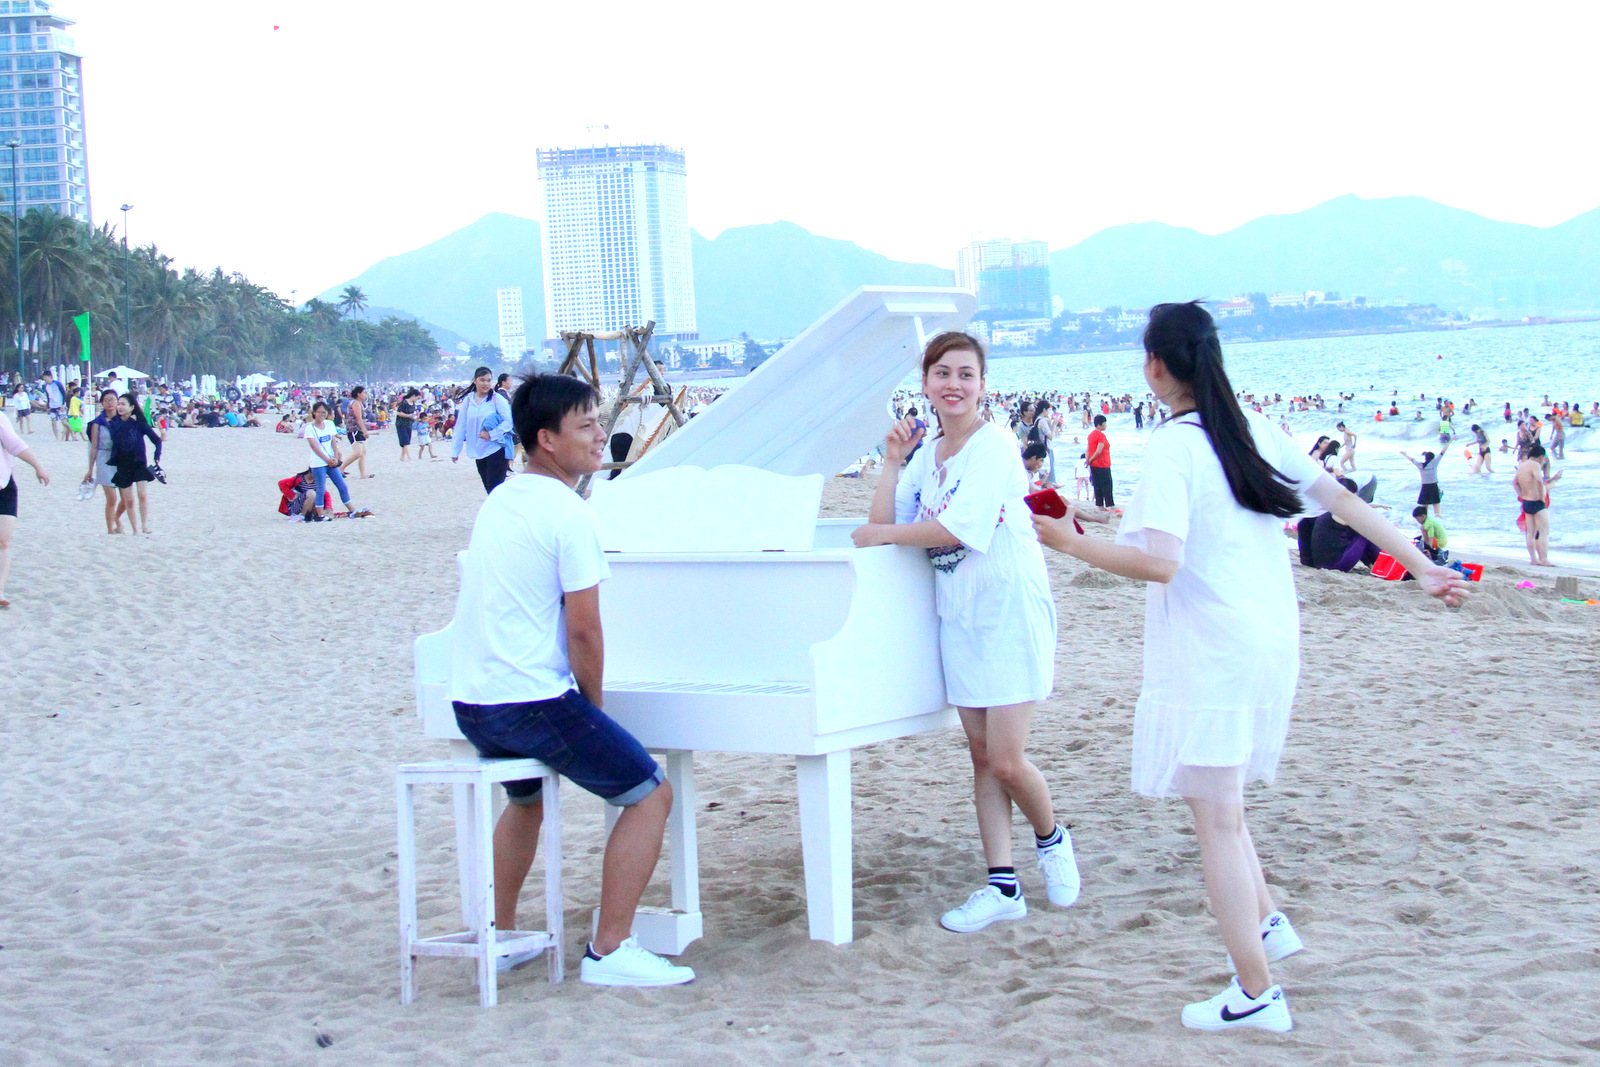 Tourists posing with model piano